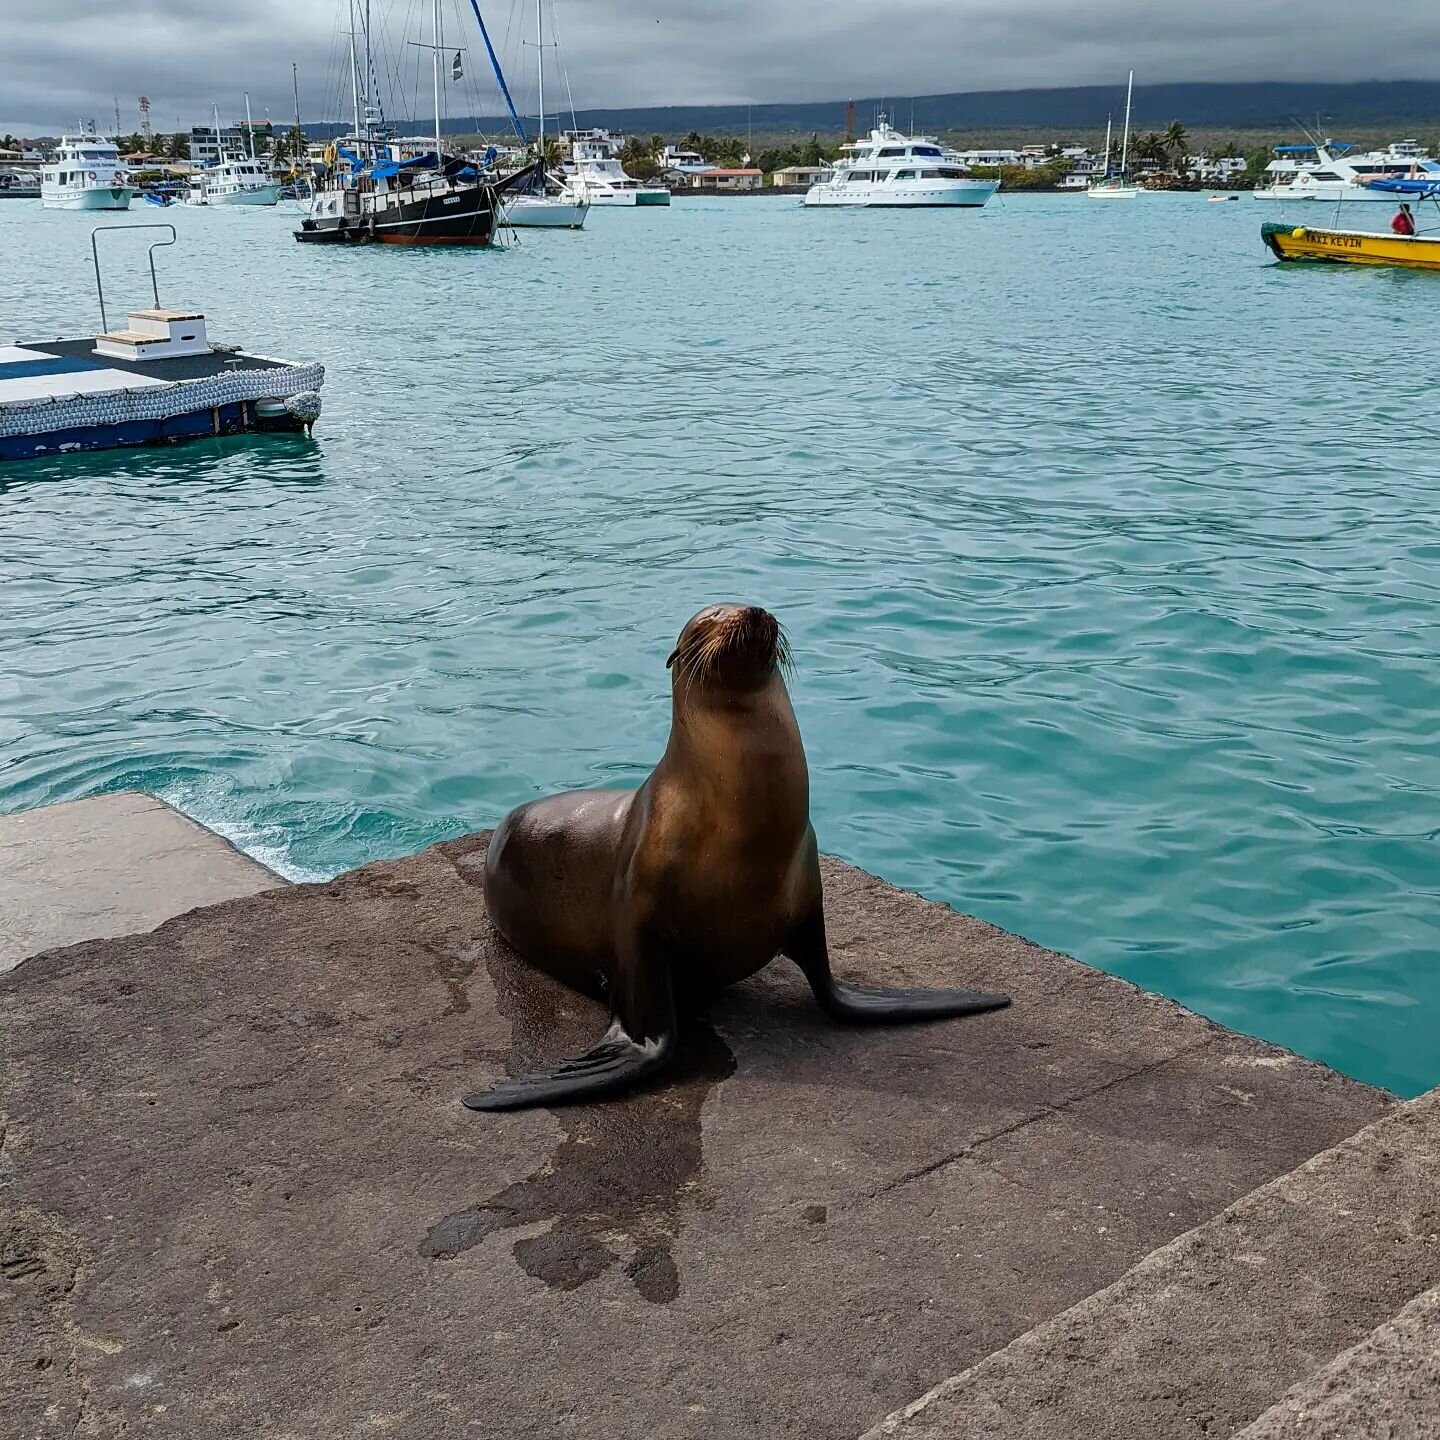 Galapagos animals will often seem to be posing for your camera - like this sea lion striking a pose!

Plan your vacation to the islands now so you can take some incredible shots for yourself 📷

Remember to only take photos without flash in order to 